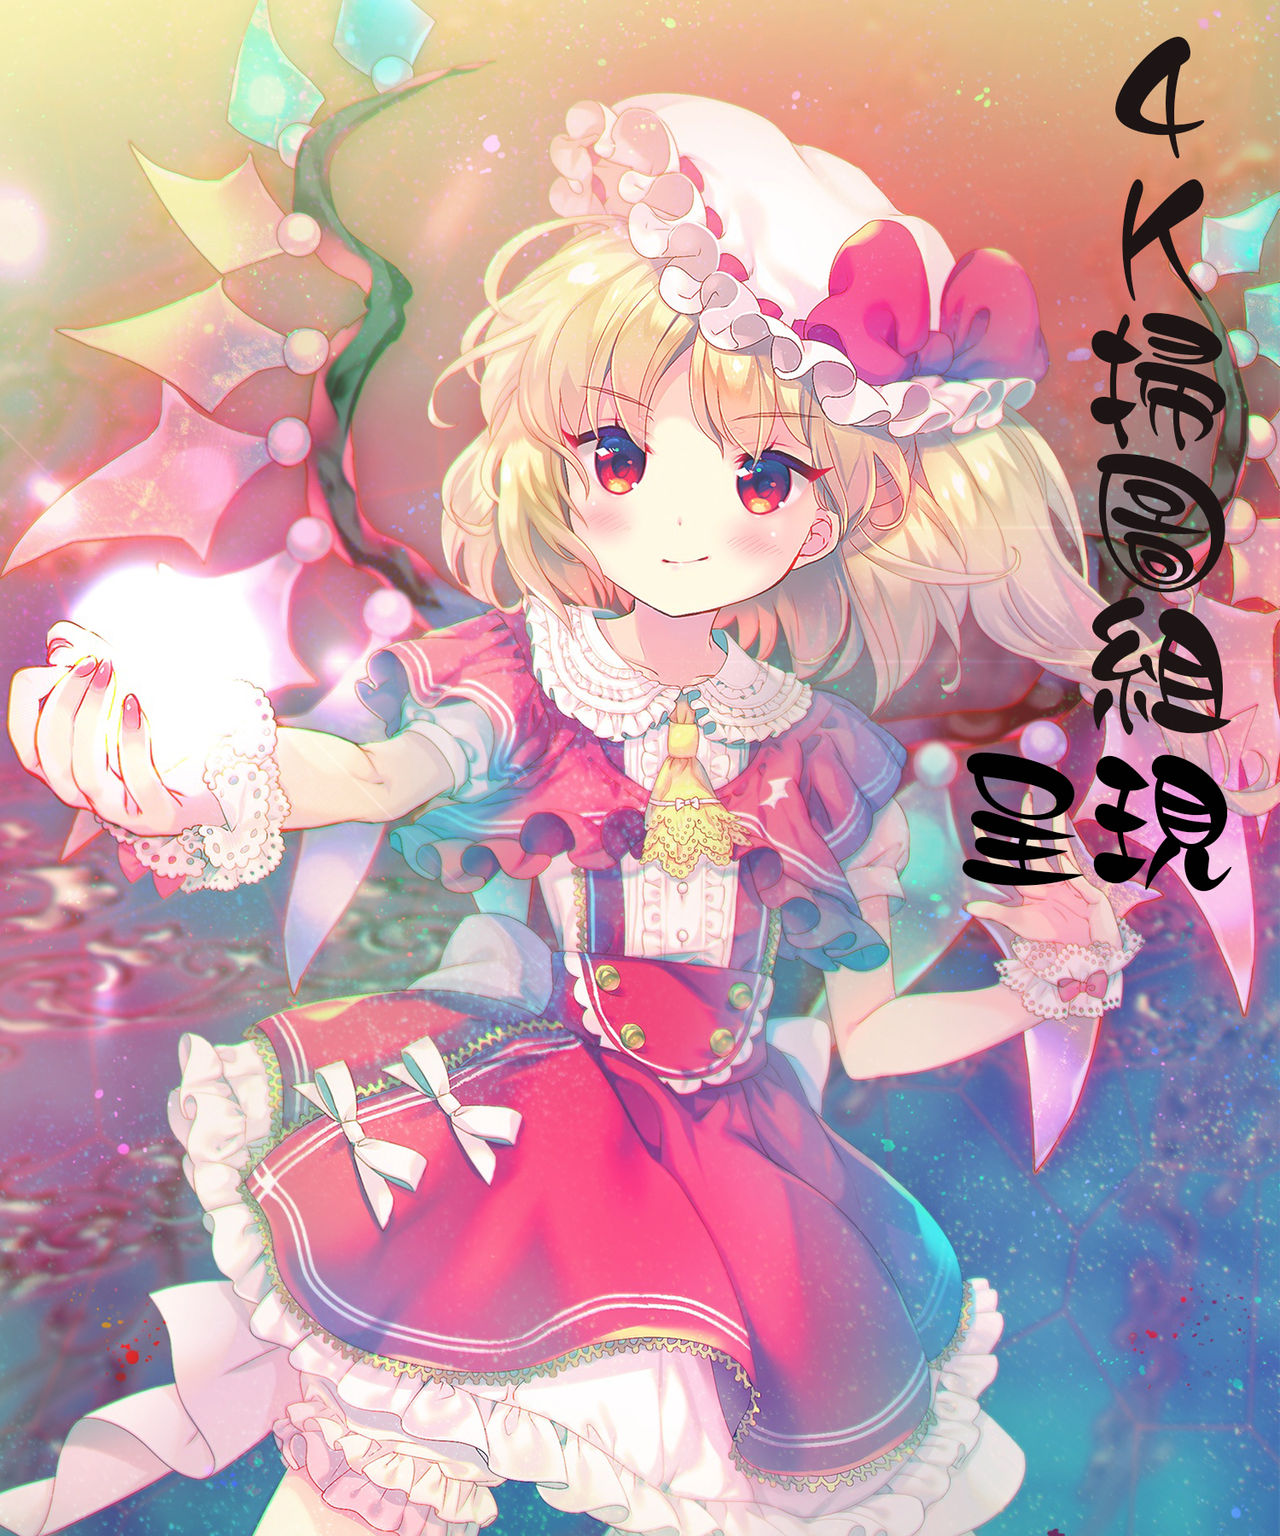 [Outou Chieri] Mix Cherry [Chinese] [桜桃千絵里] みっくすチェリー [中国翻訳]